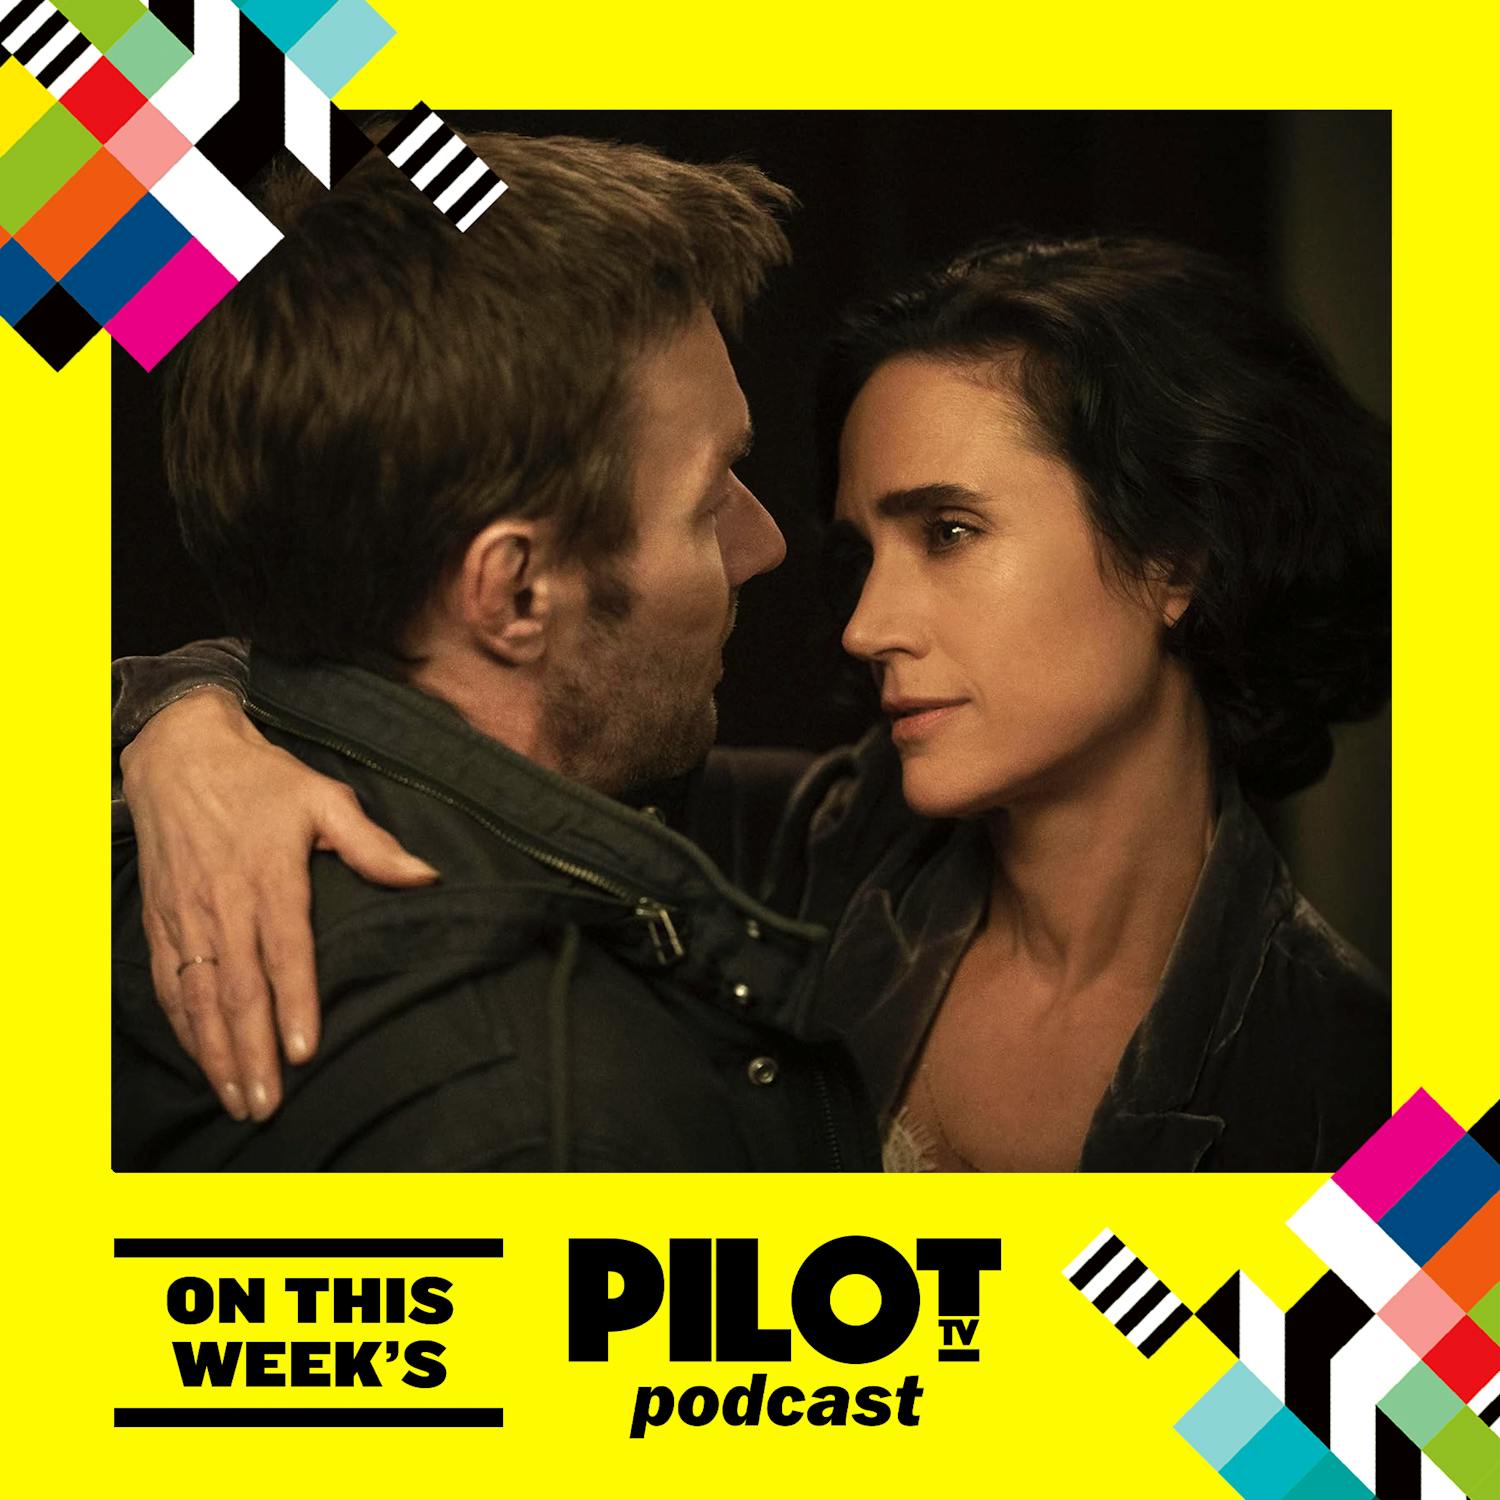 #285 Dark Matter, Doctor Who, Inside No.9, and The Young Offenders. With guest Jennifer Connelly